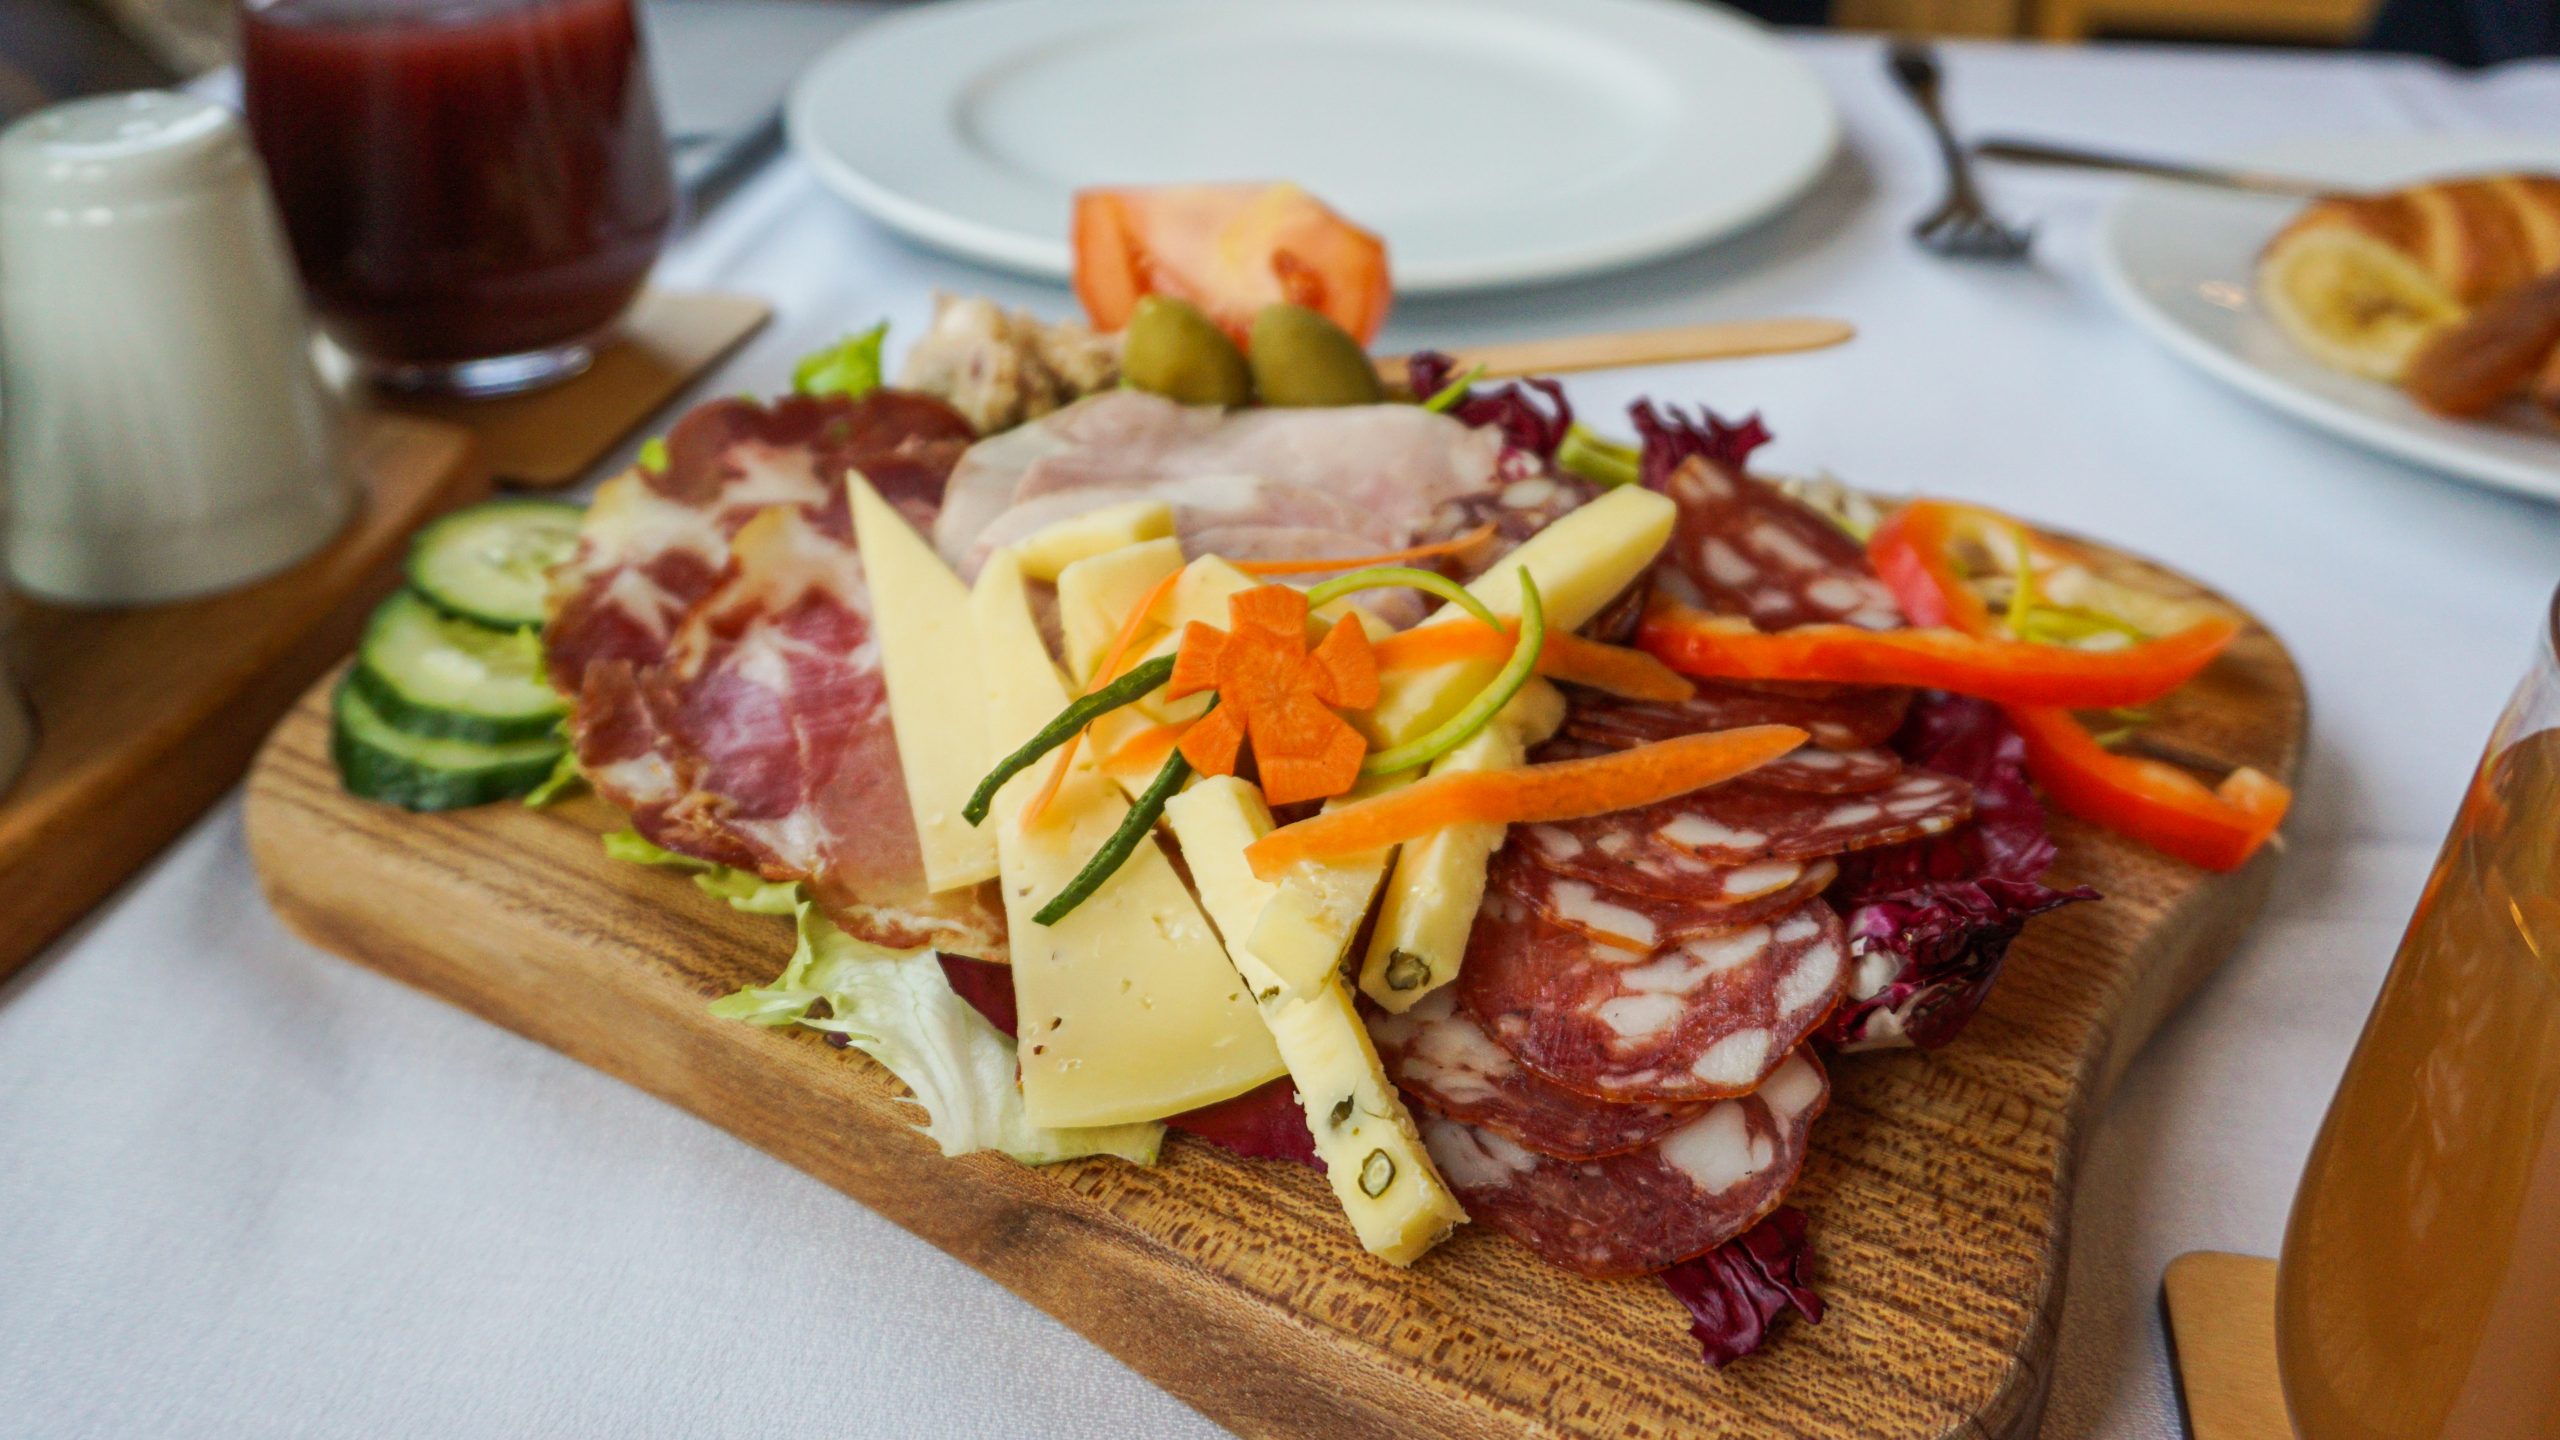 A cheese and meat platter at the breakfast of Villa Triglav Hotel